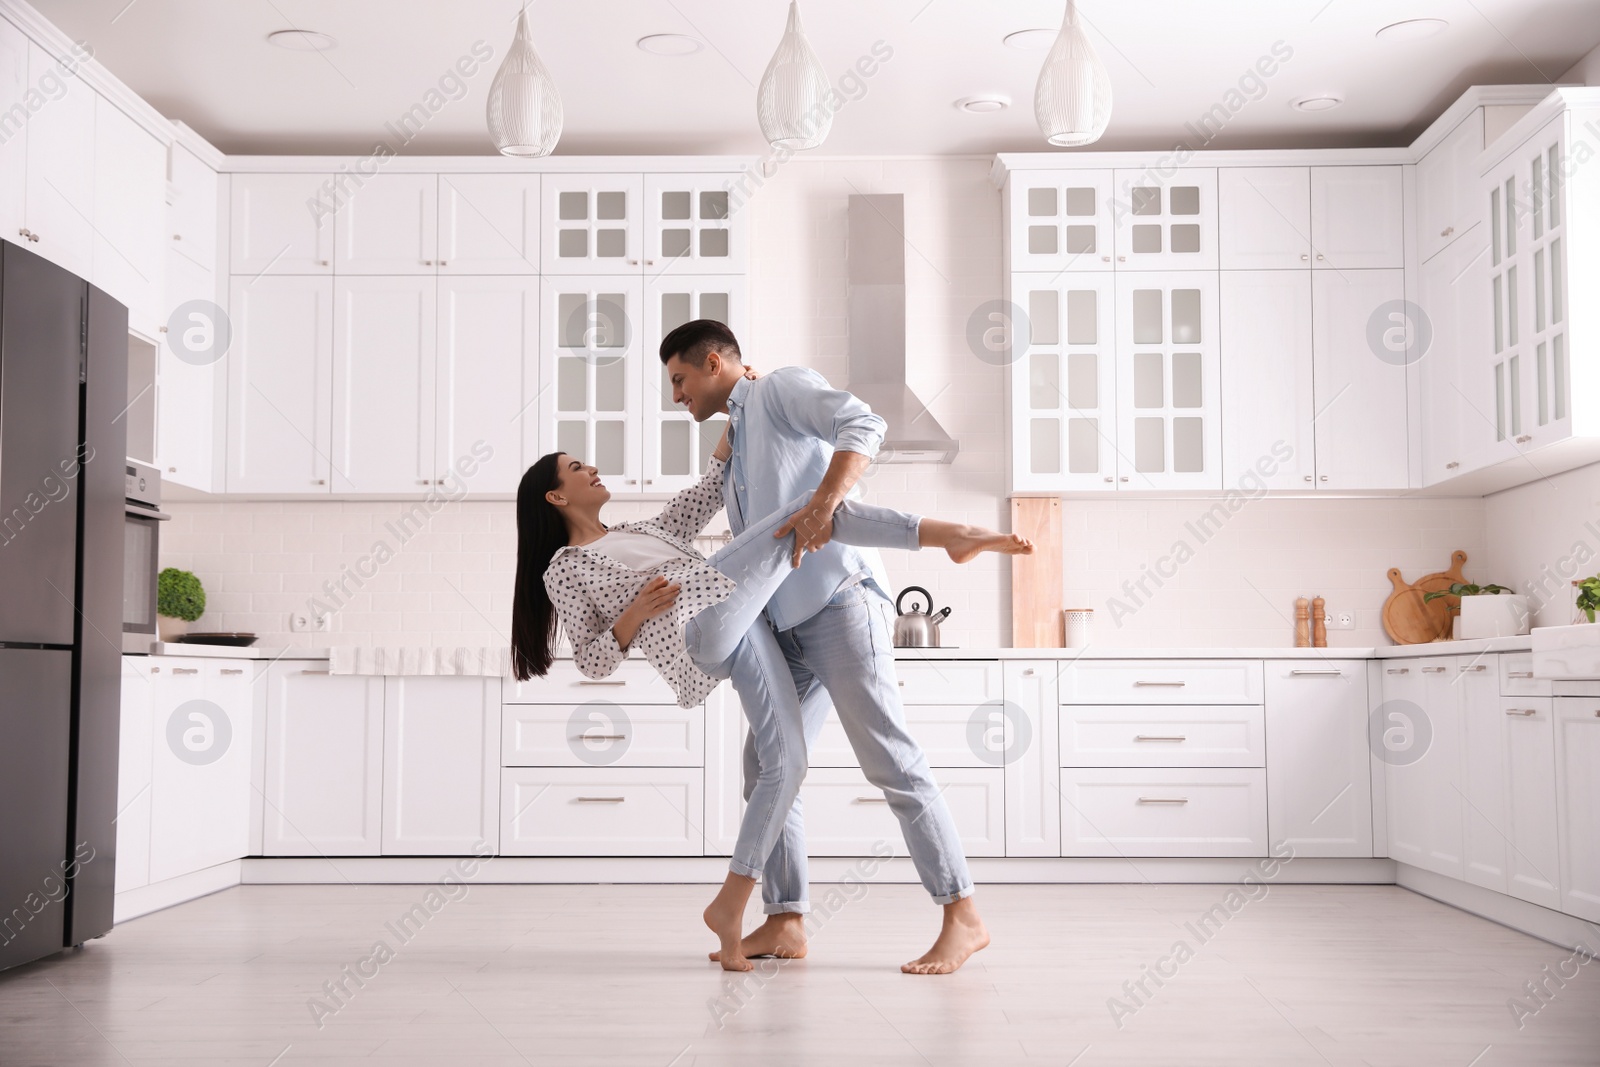 Photo of Happy couple dancing barefoot in kitchen. Floor heating system